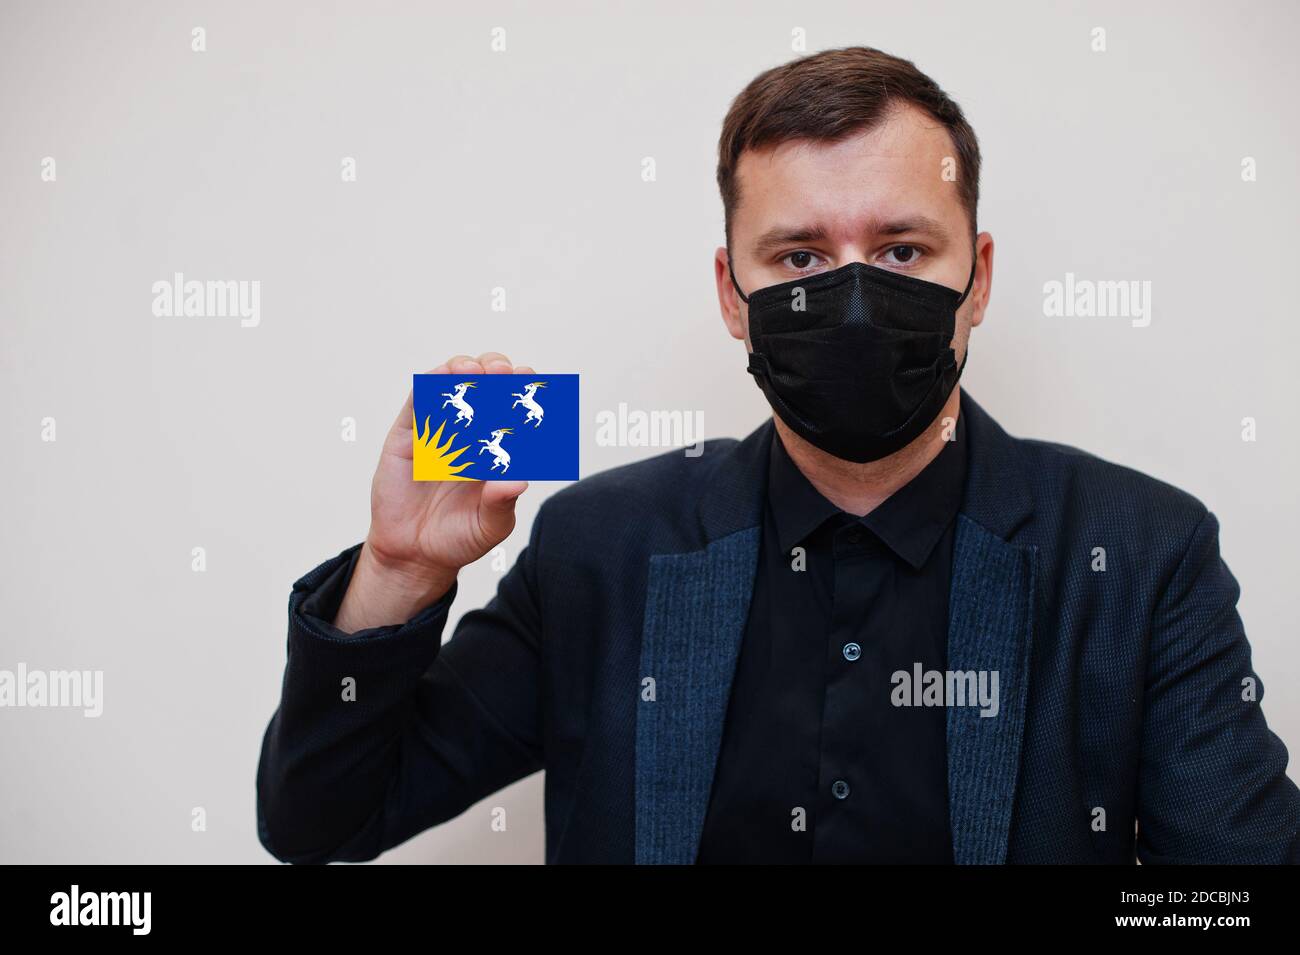 Man wear black formal and protect face mask, hold Merionethshire flag card isolated on white background. United Kingdom counties of Wales coronavirus Stock Photo